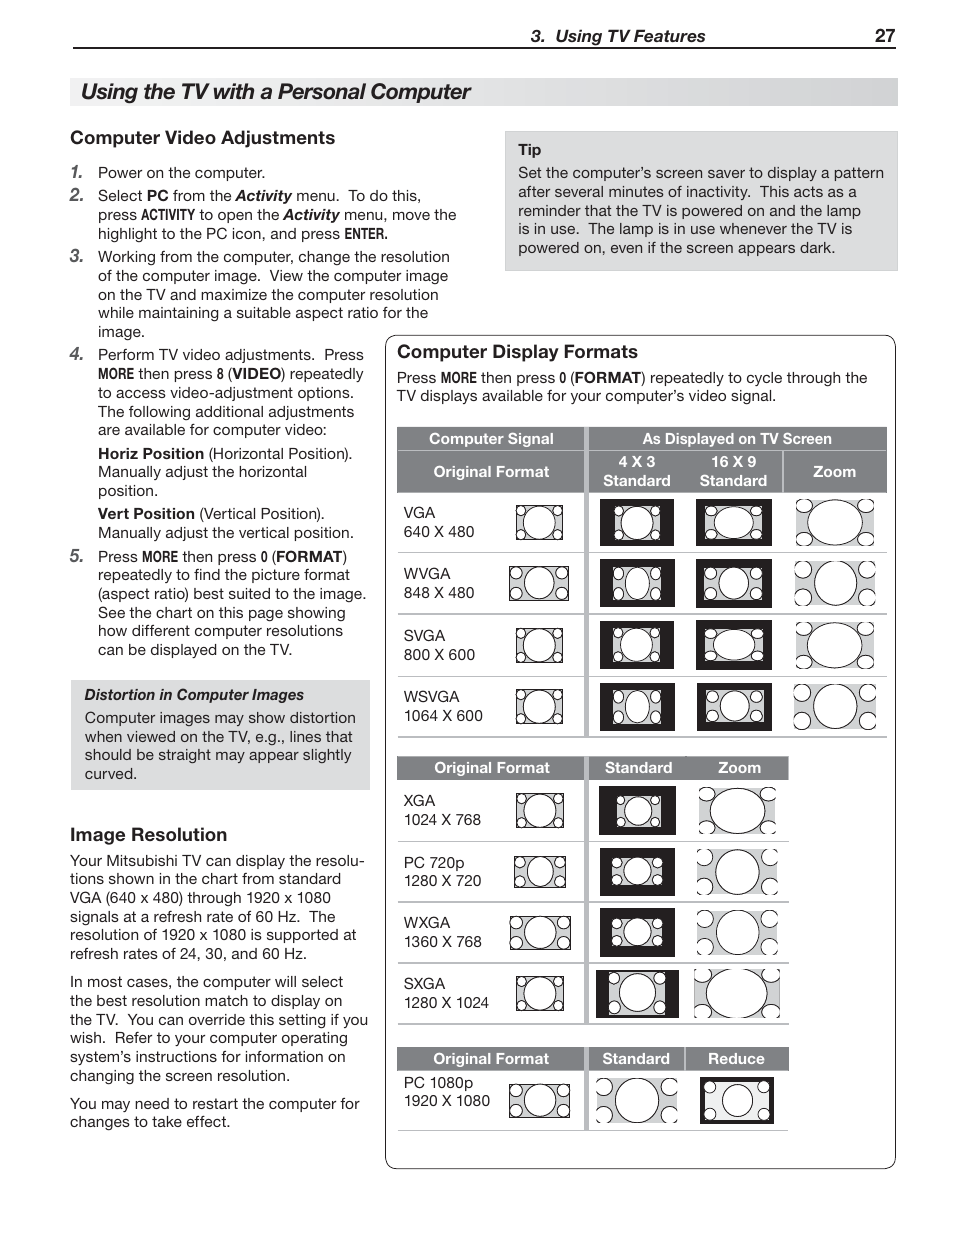 Using the tv with a personal computer | Nikon DLP 837 Series User Manual | Page 27 / 86